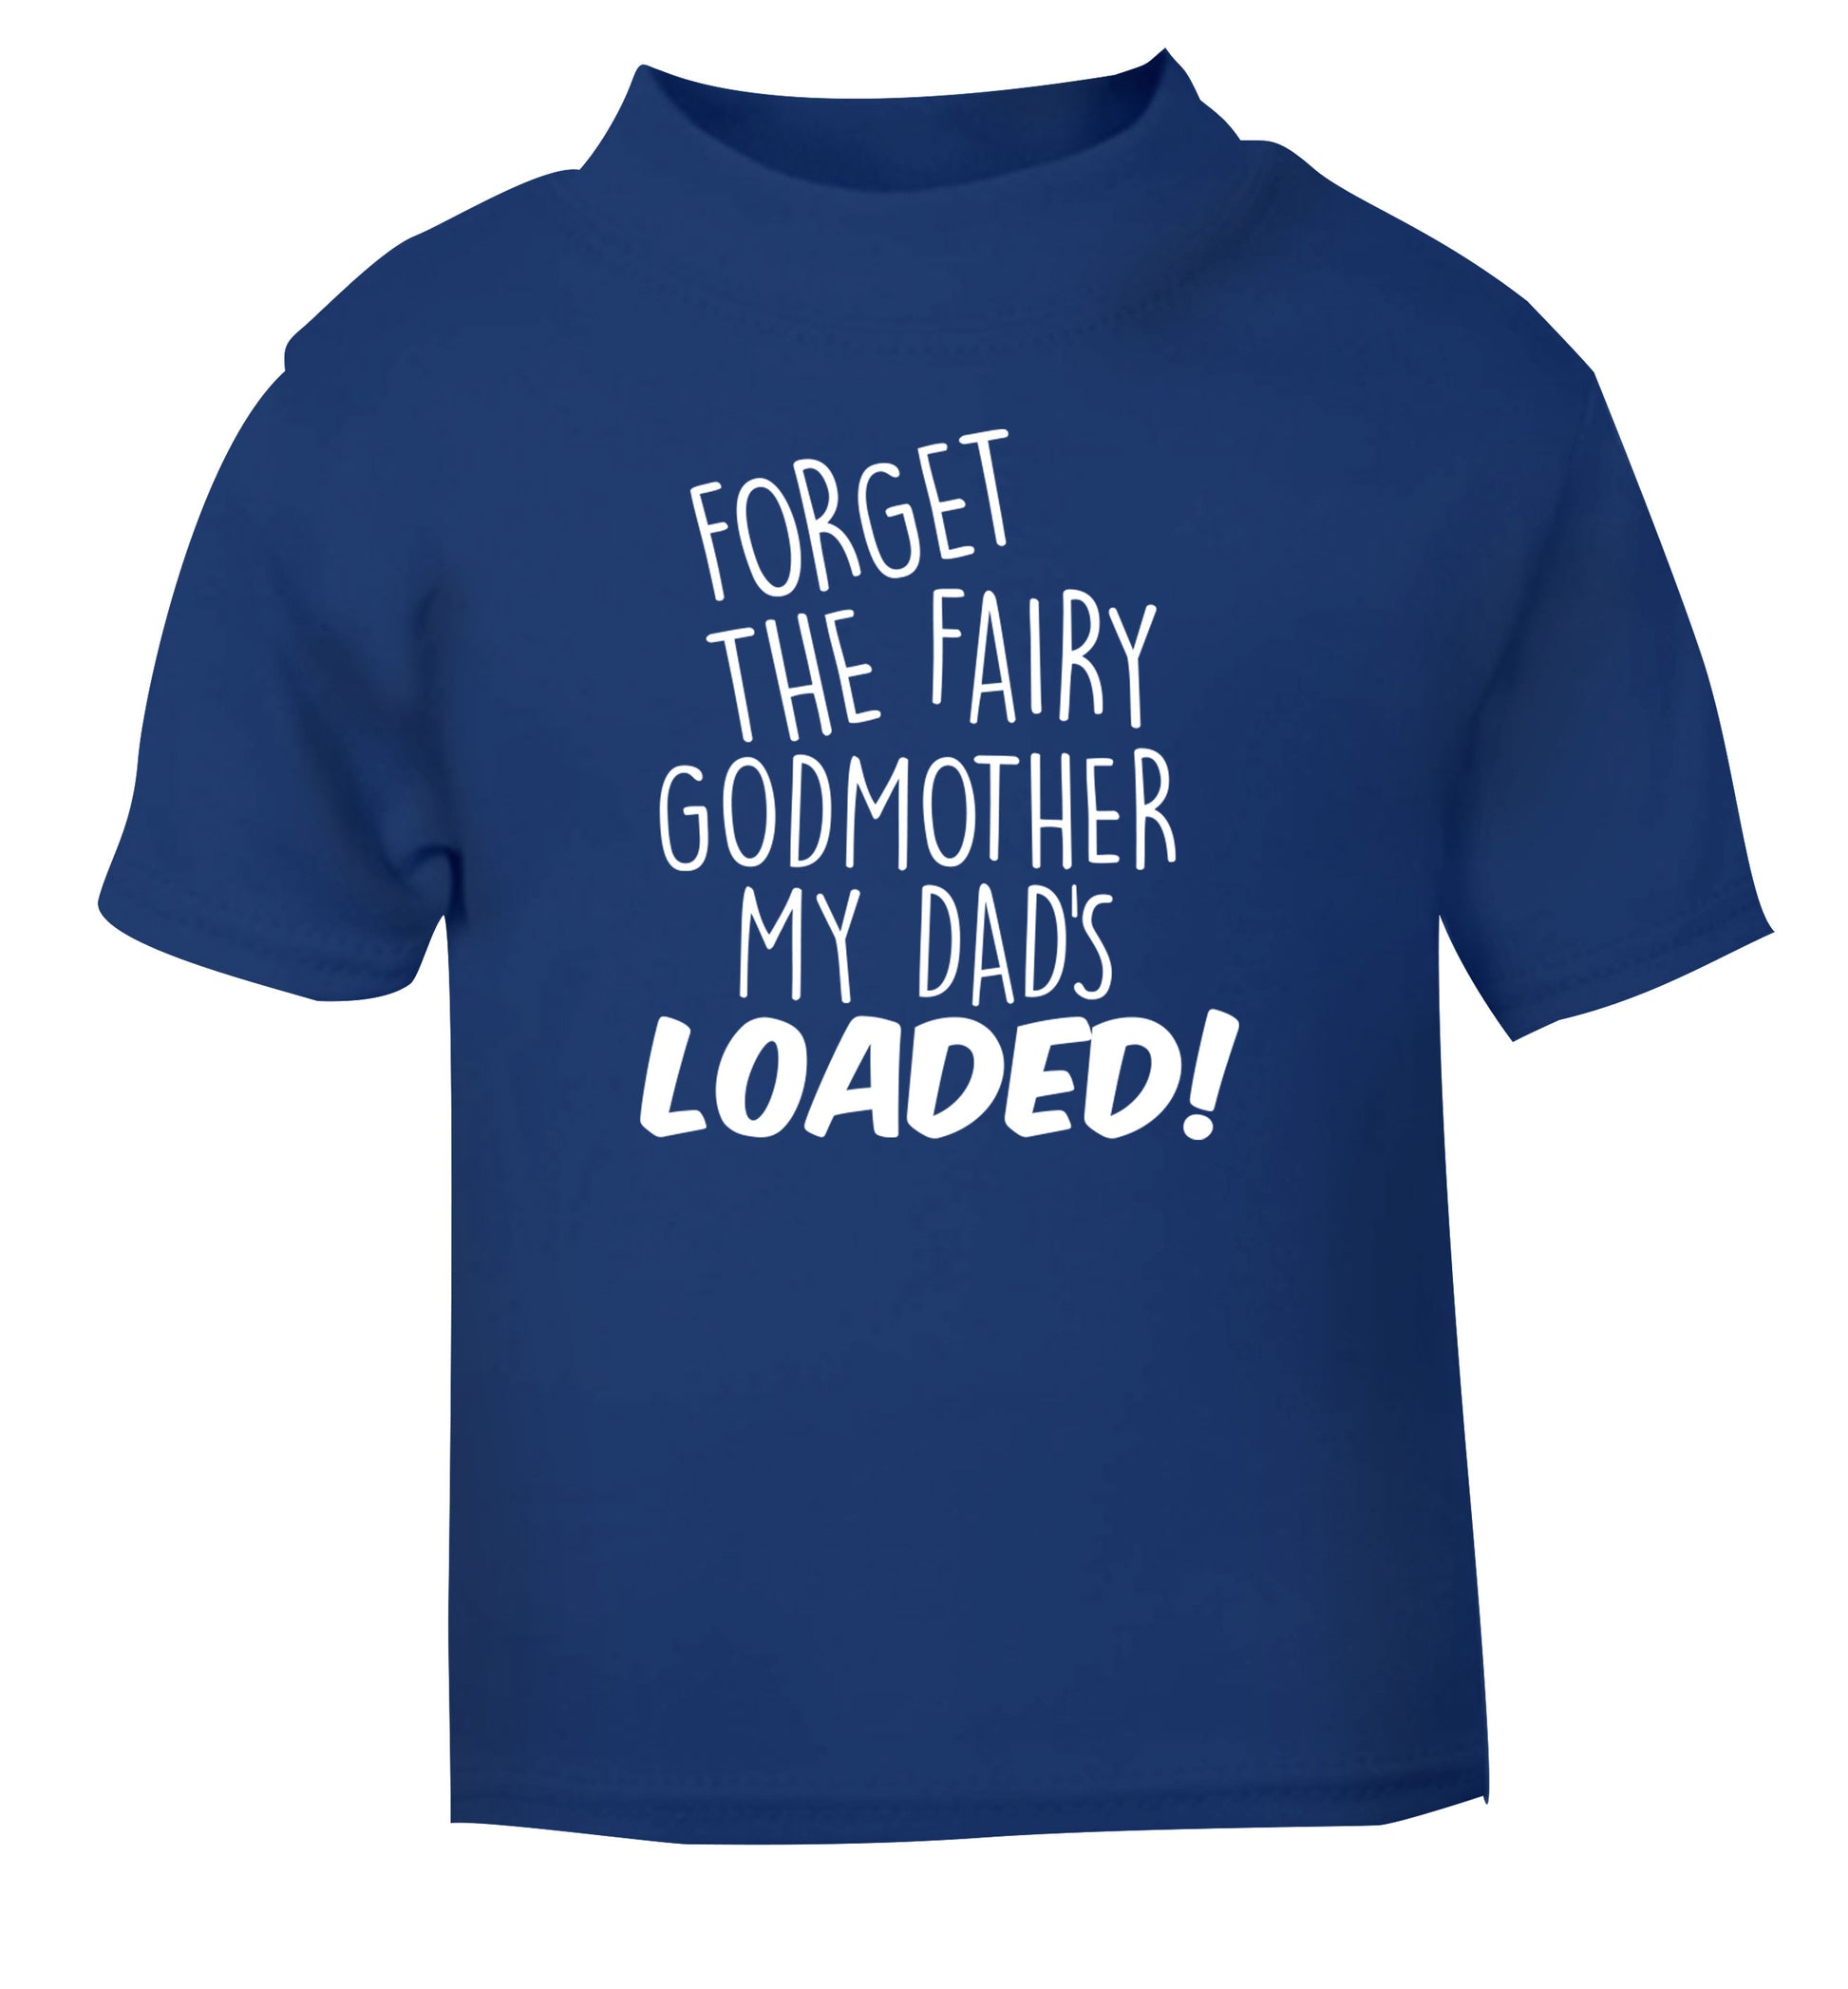 Forget the fairy godmother my dad's loaded blue Baby Toddler Tshirt 2 Years